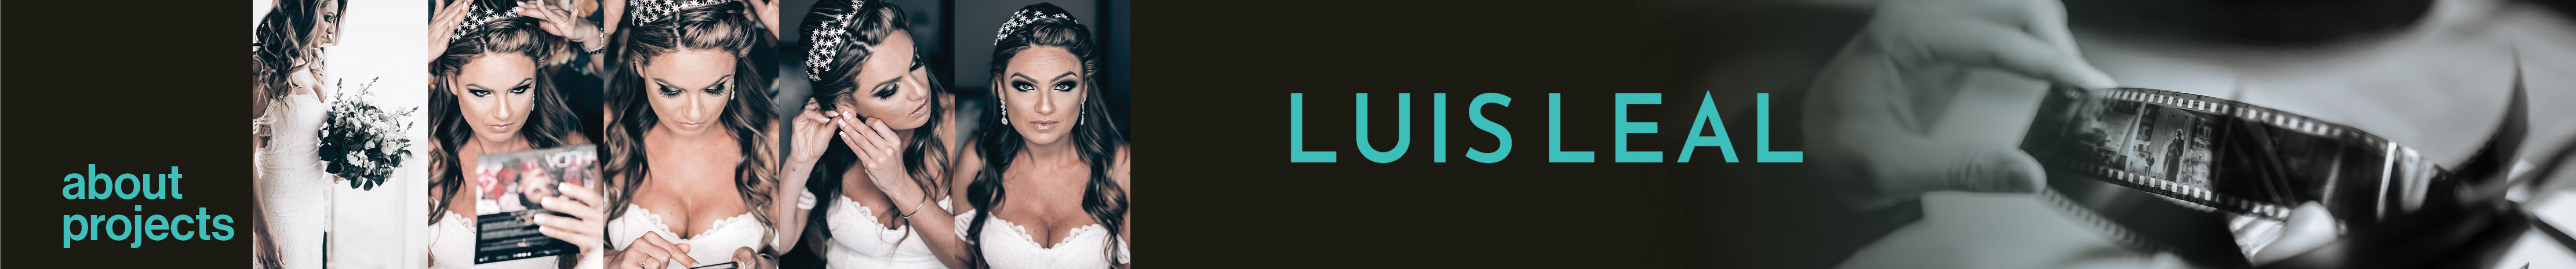 Luis Leal's profile banner